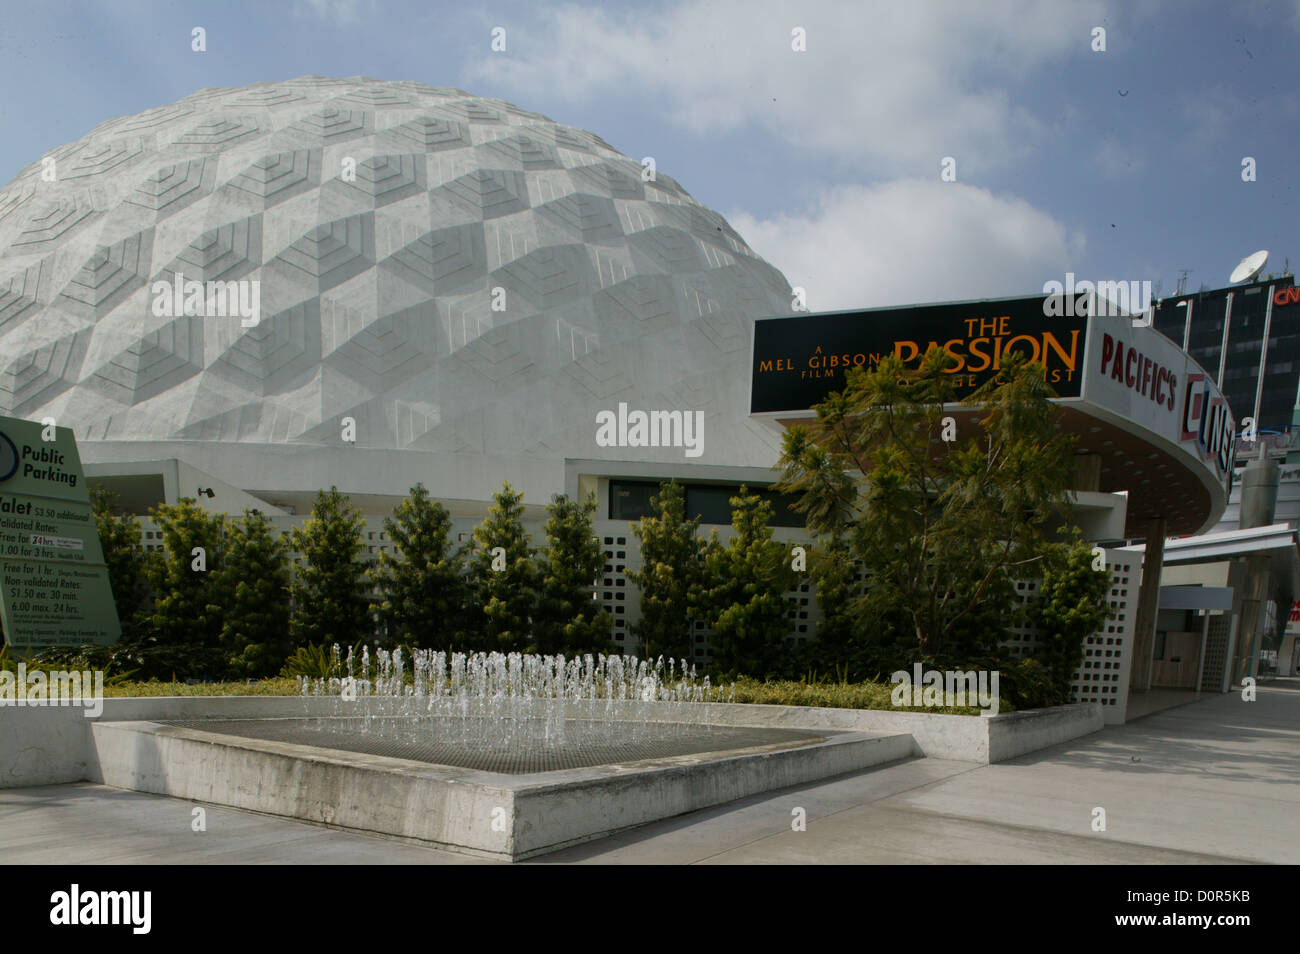 Cinerama Dome movie theater in Hollywood, CA Stock Photo